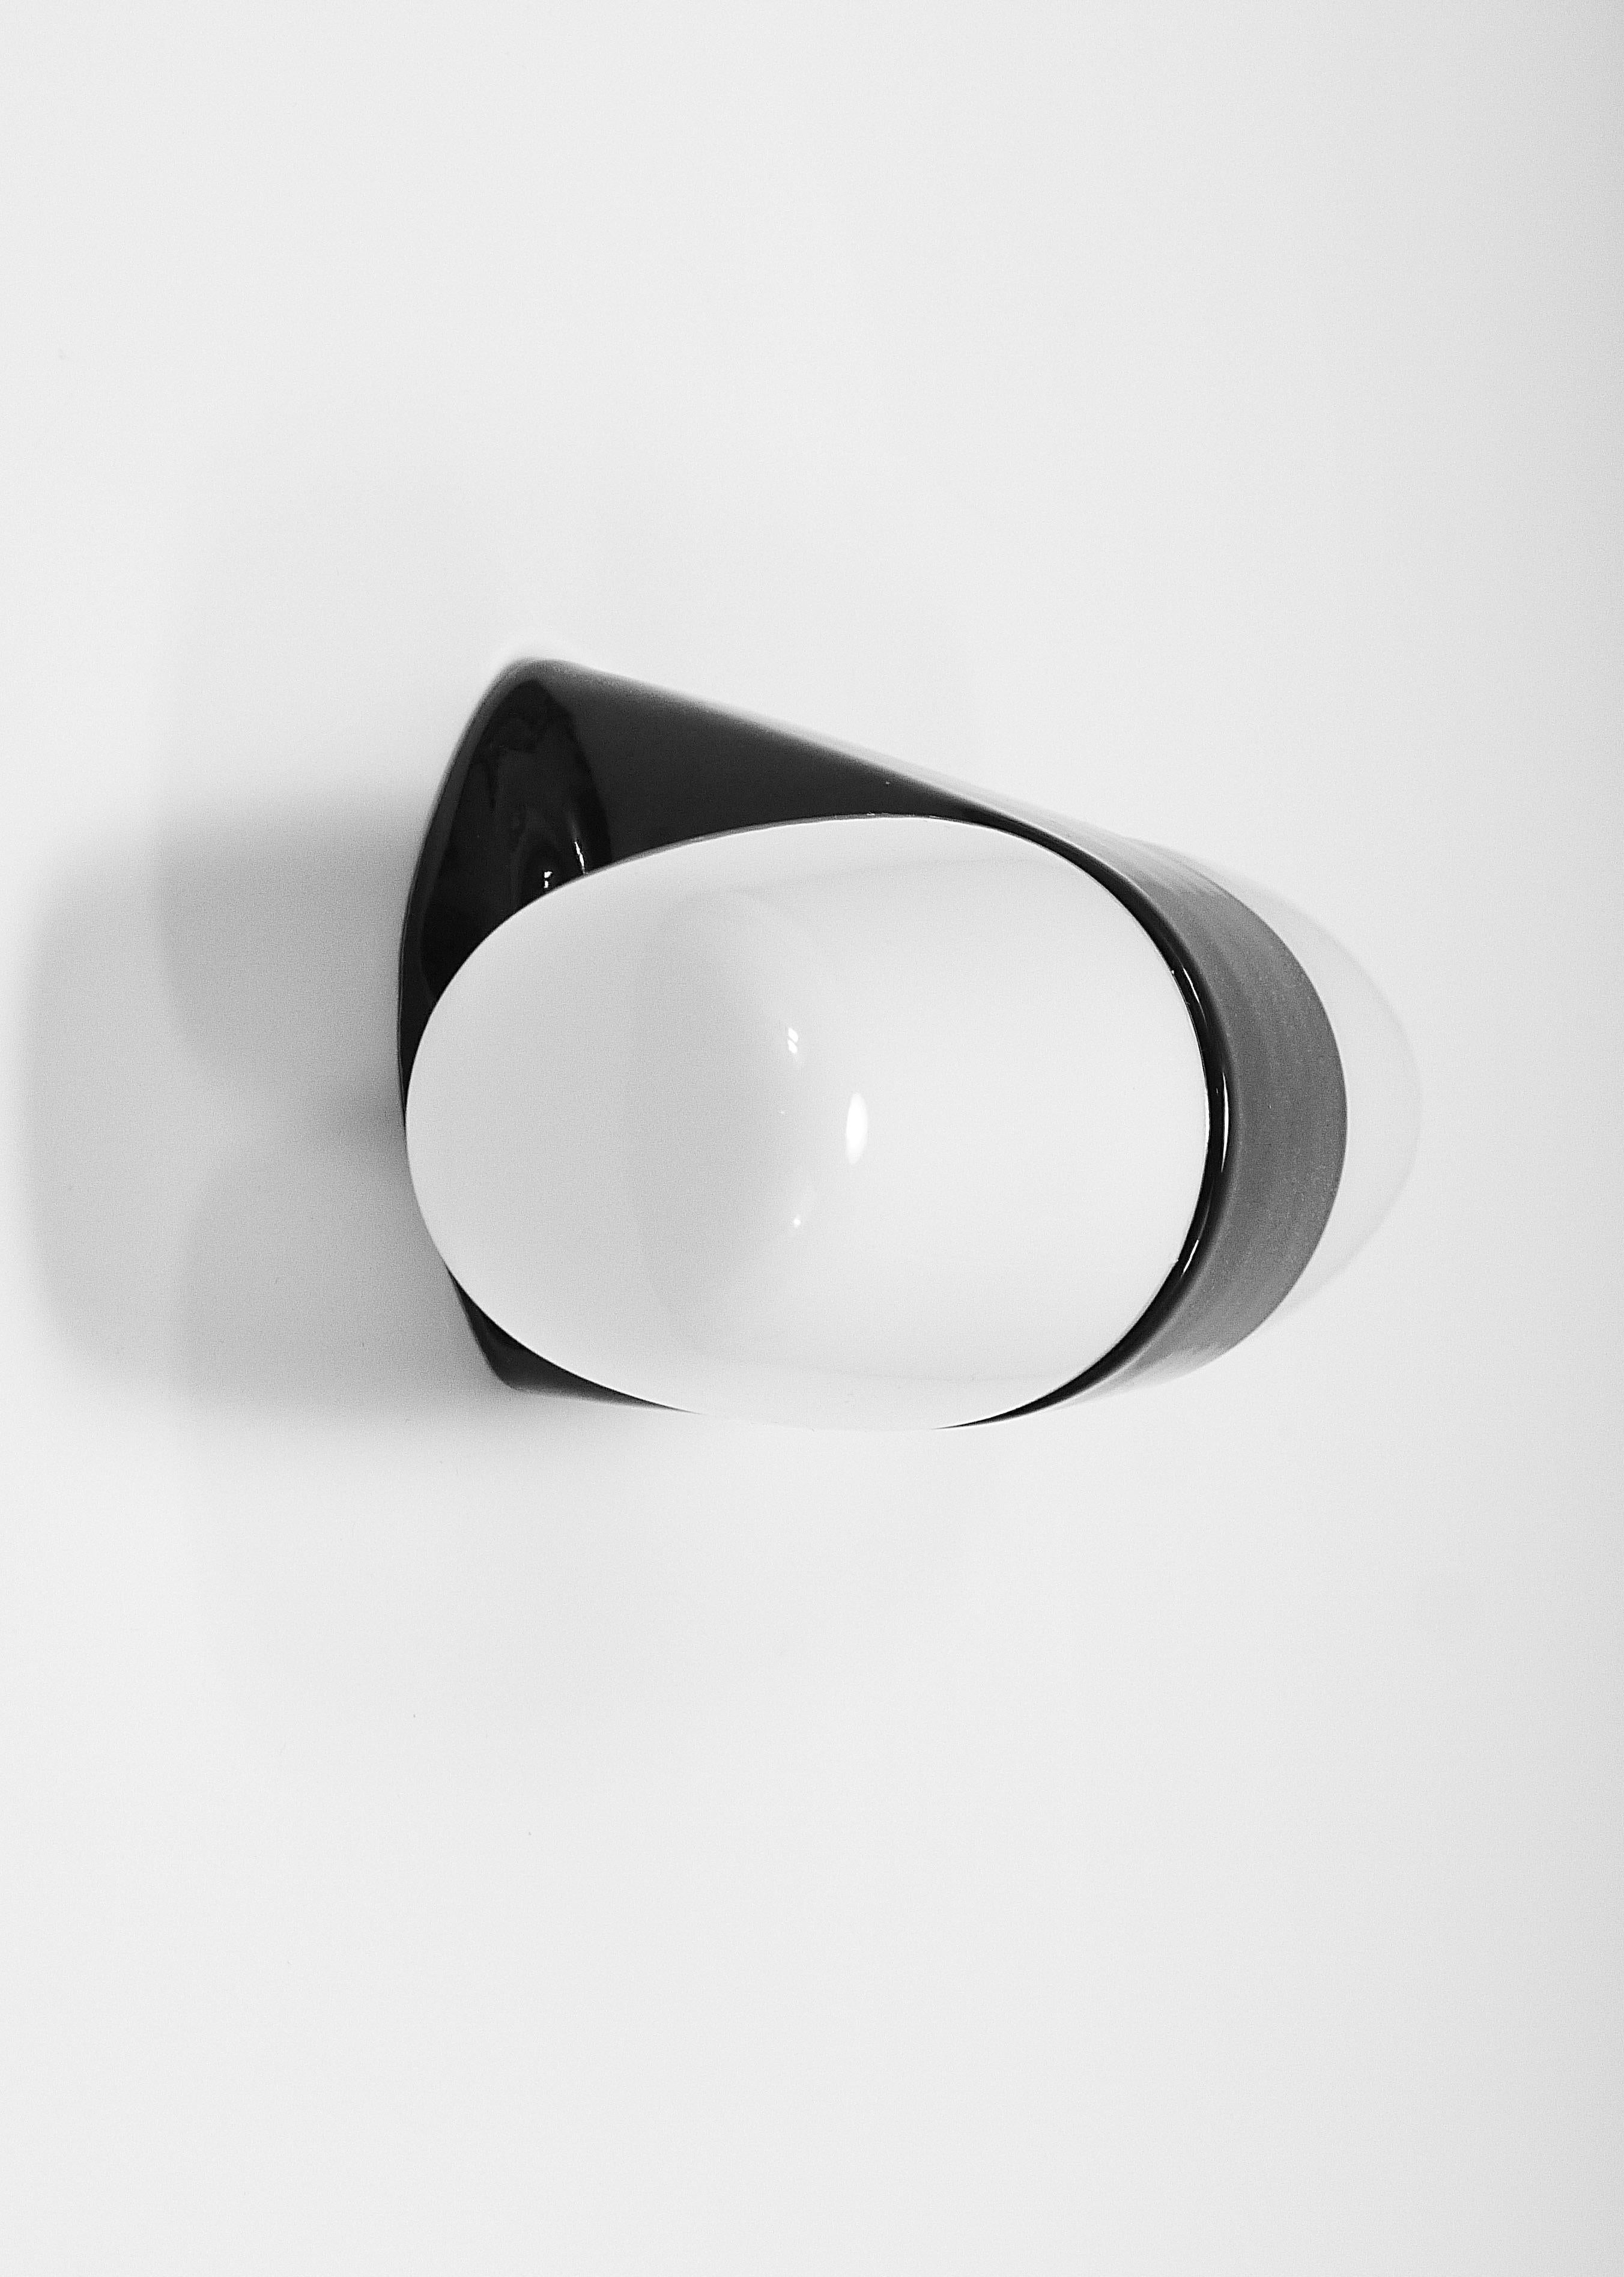 20th Century Wilhelm Wagenfeld Black Bauhaus Sconce Double Wall Light by Linder Germany, 1950 For Sale